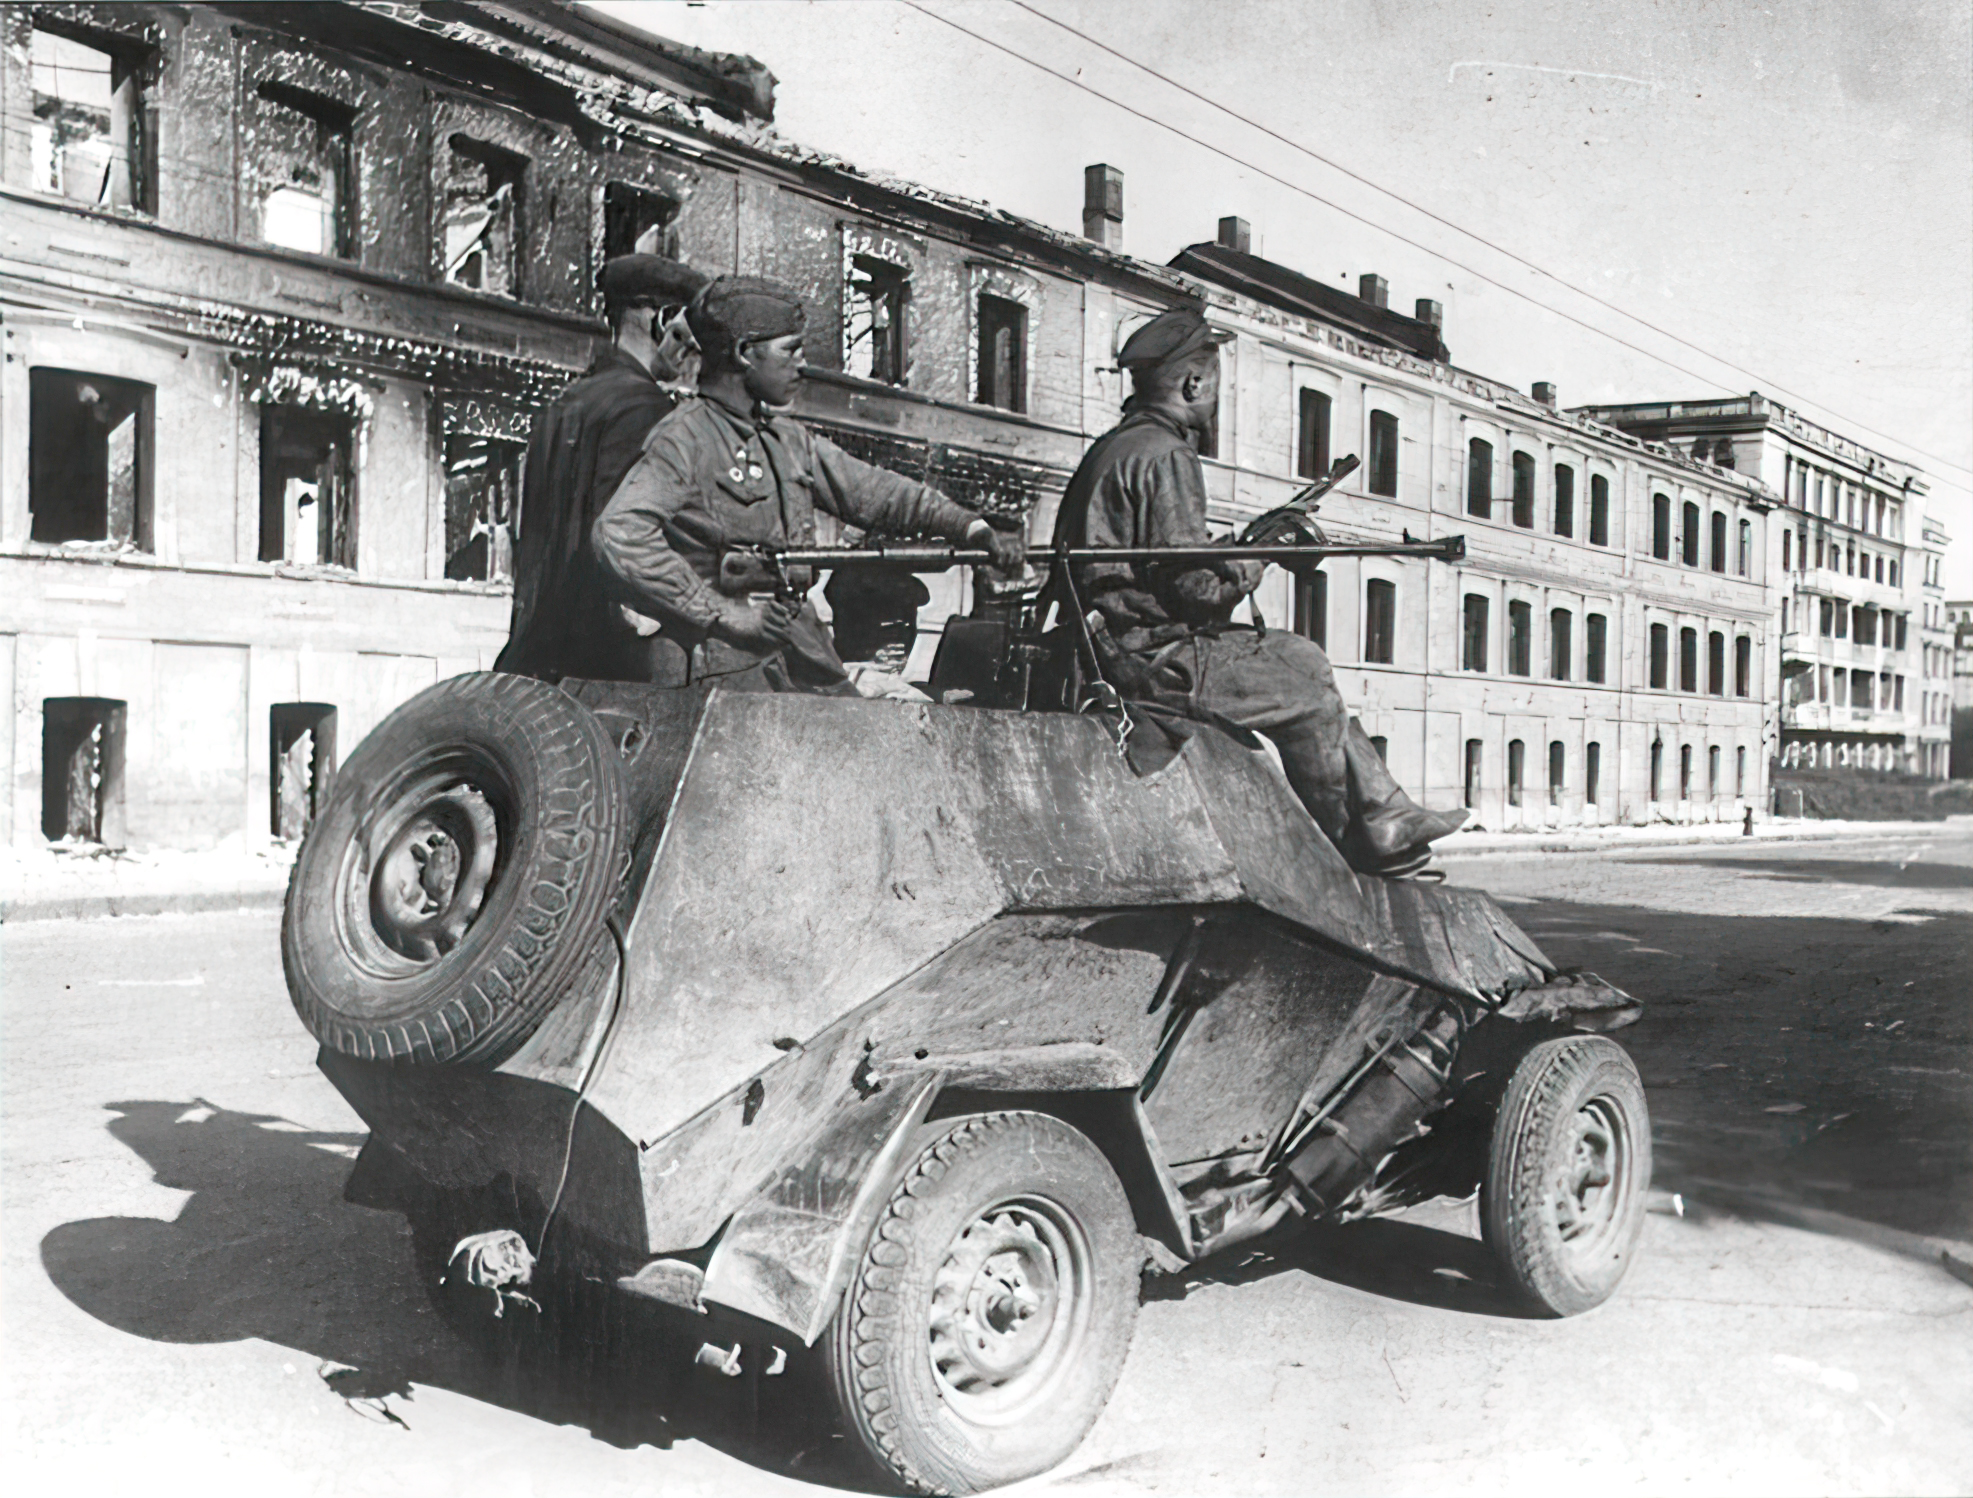 Army vehicle BA 64 ATR with soviet ground forces in Stalino Ukarain 01